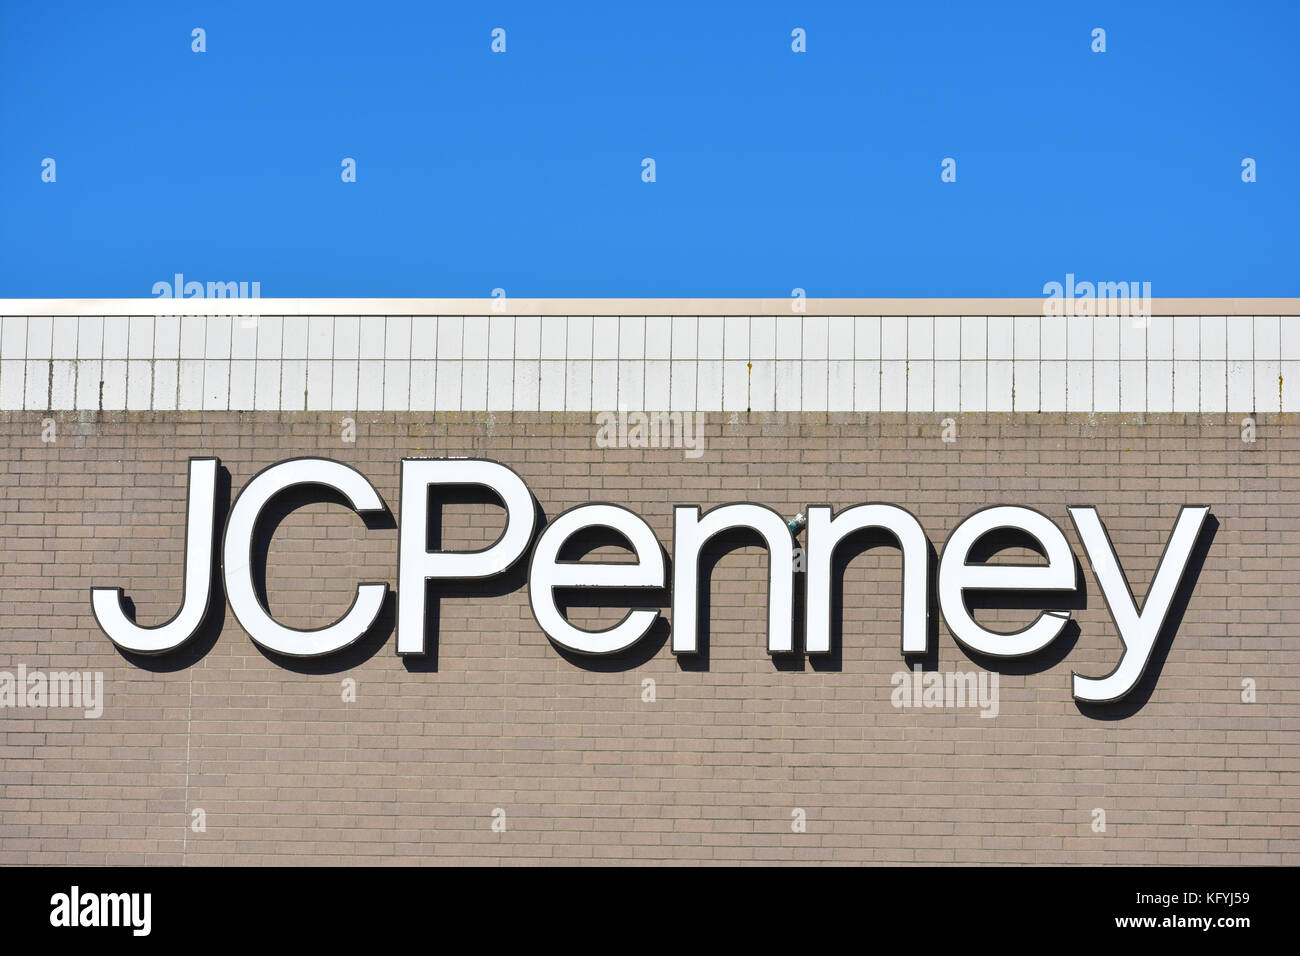 An old JC Penny store located at Bellis Fair mall in Bellingham, Washington.  The brickwork and signage are old and in need of repairs. Stock Photo